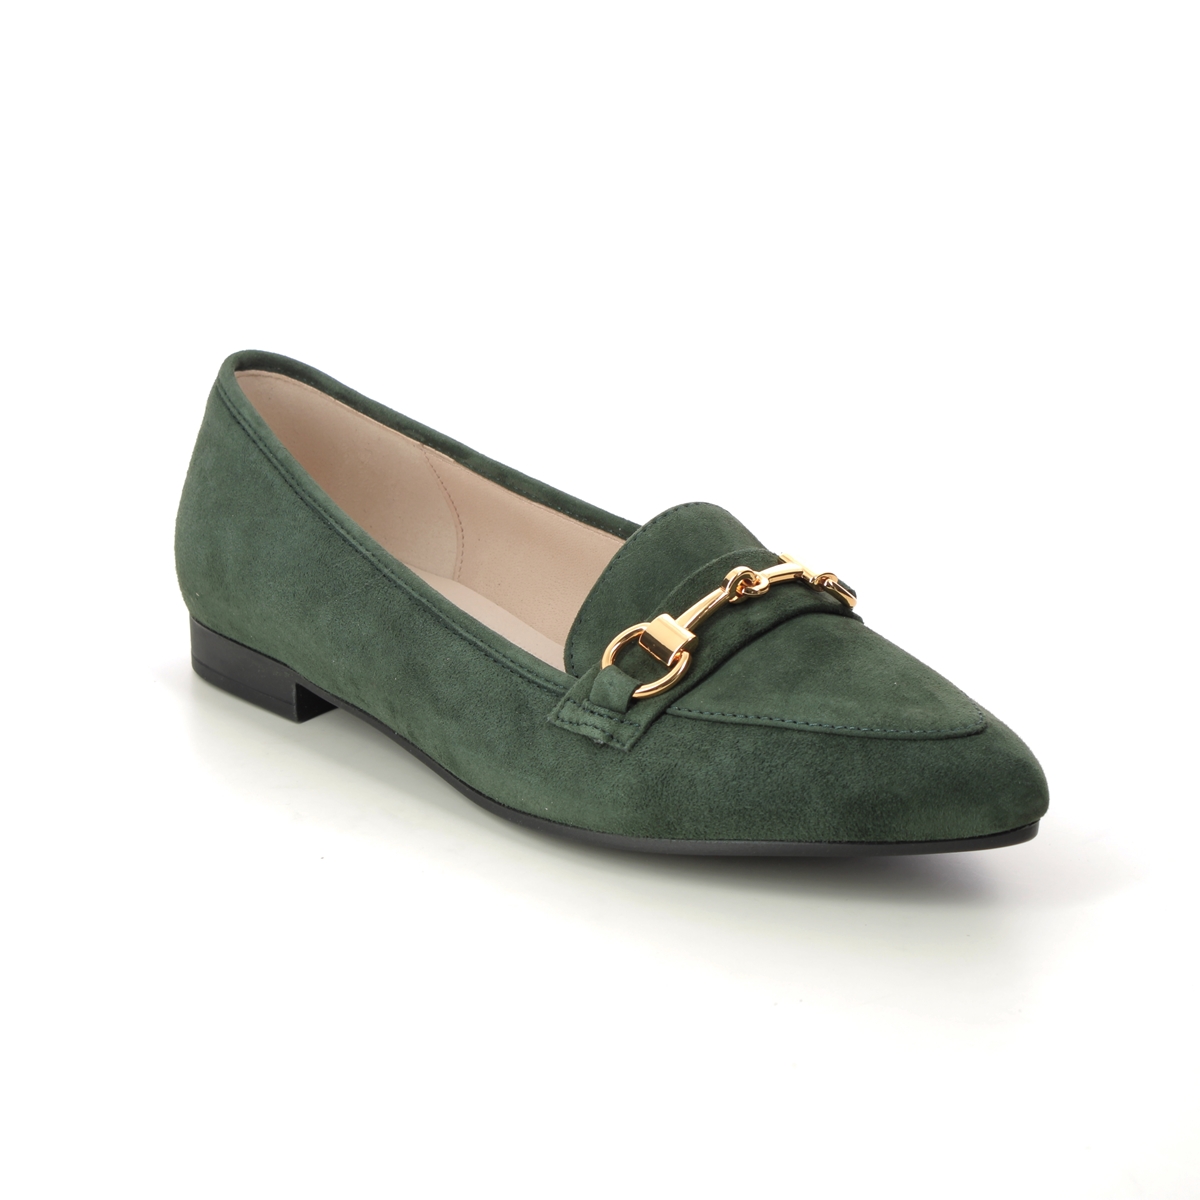 Gabor Caterham Carol Green Suede Womens loafers 31.302.19 in a Plain Leather in Size 6